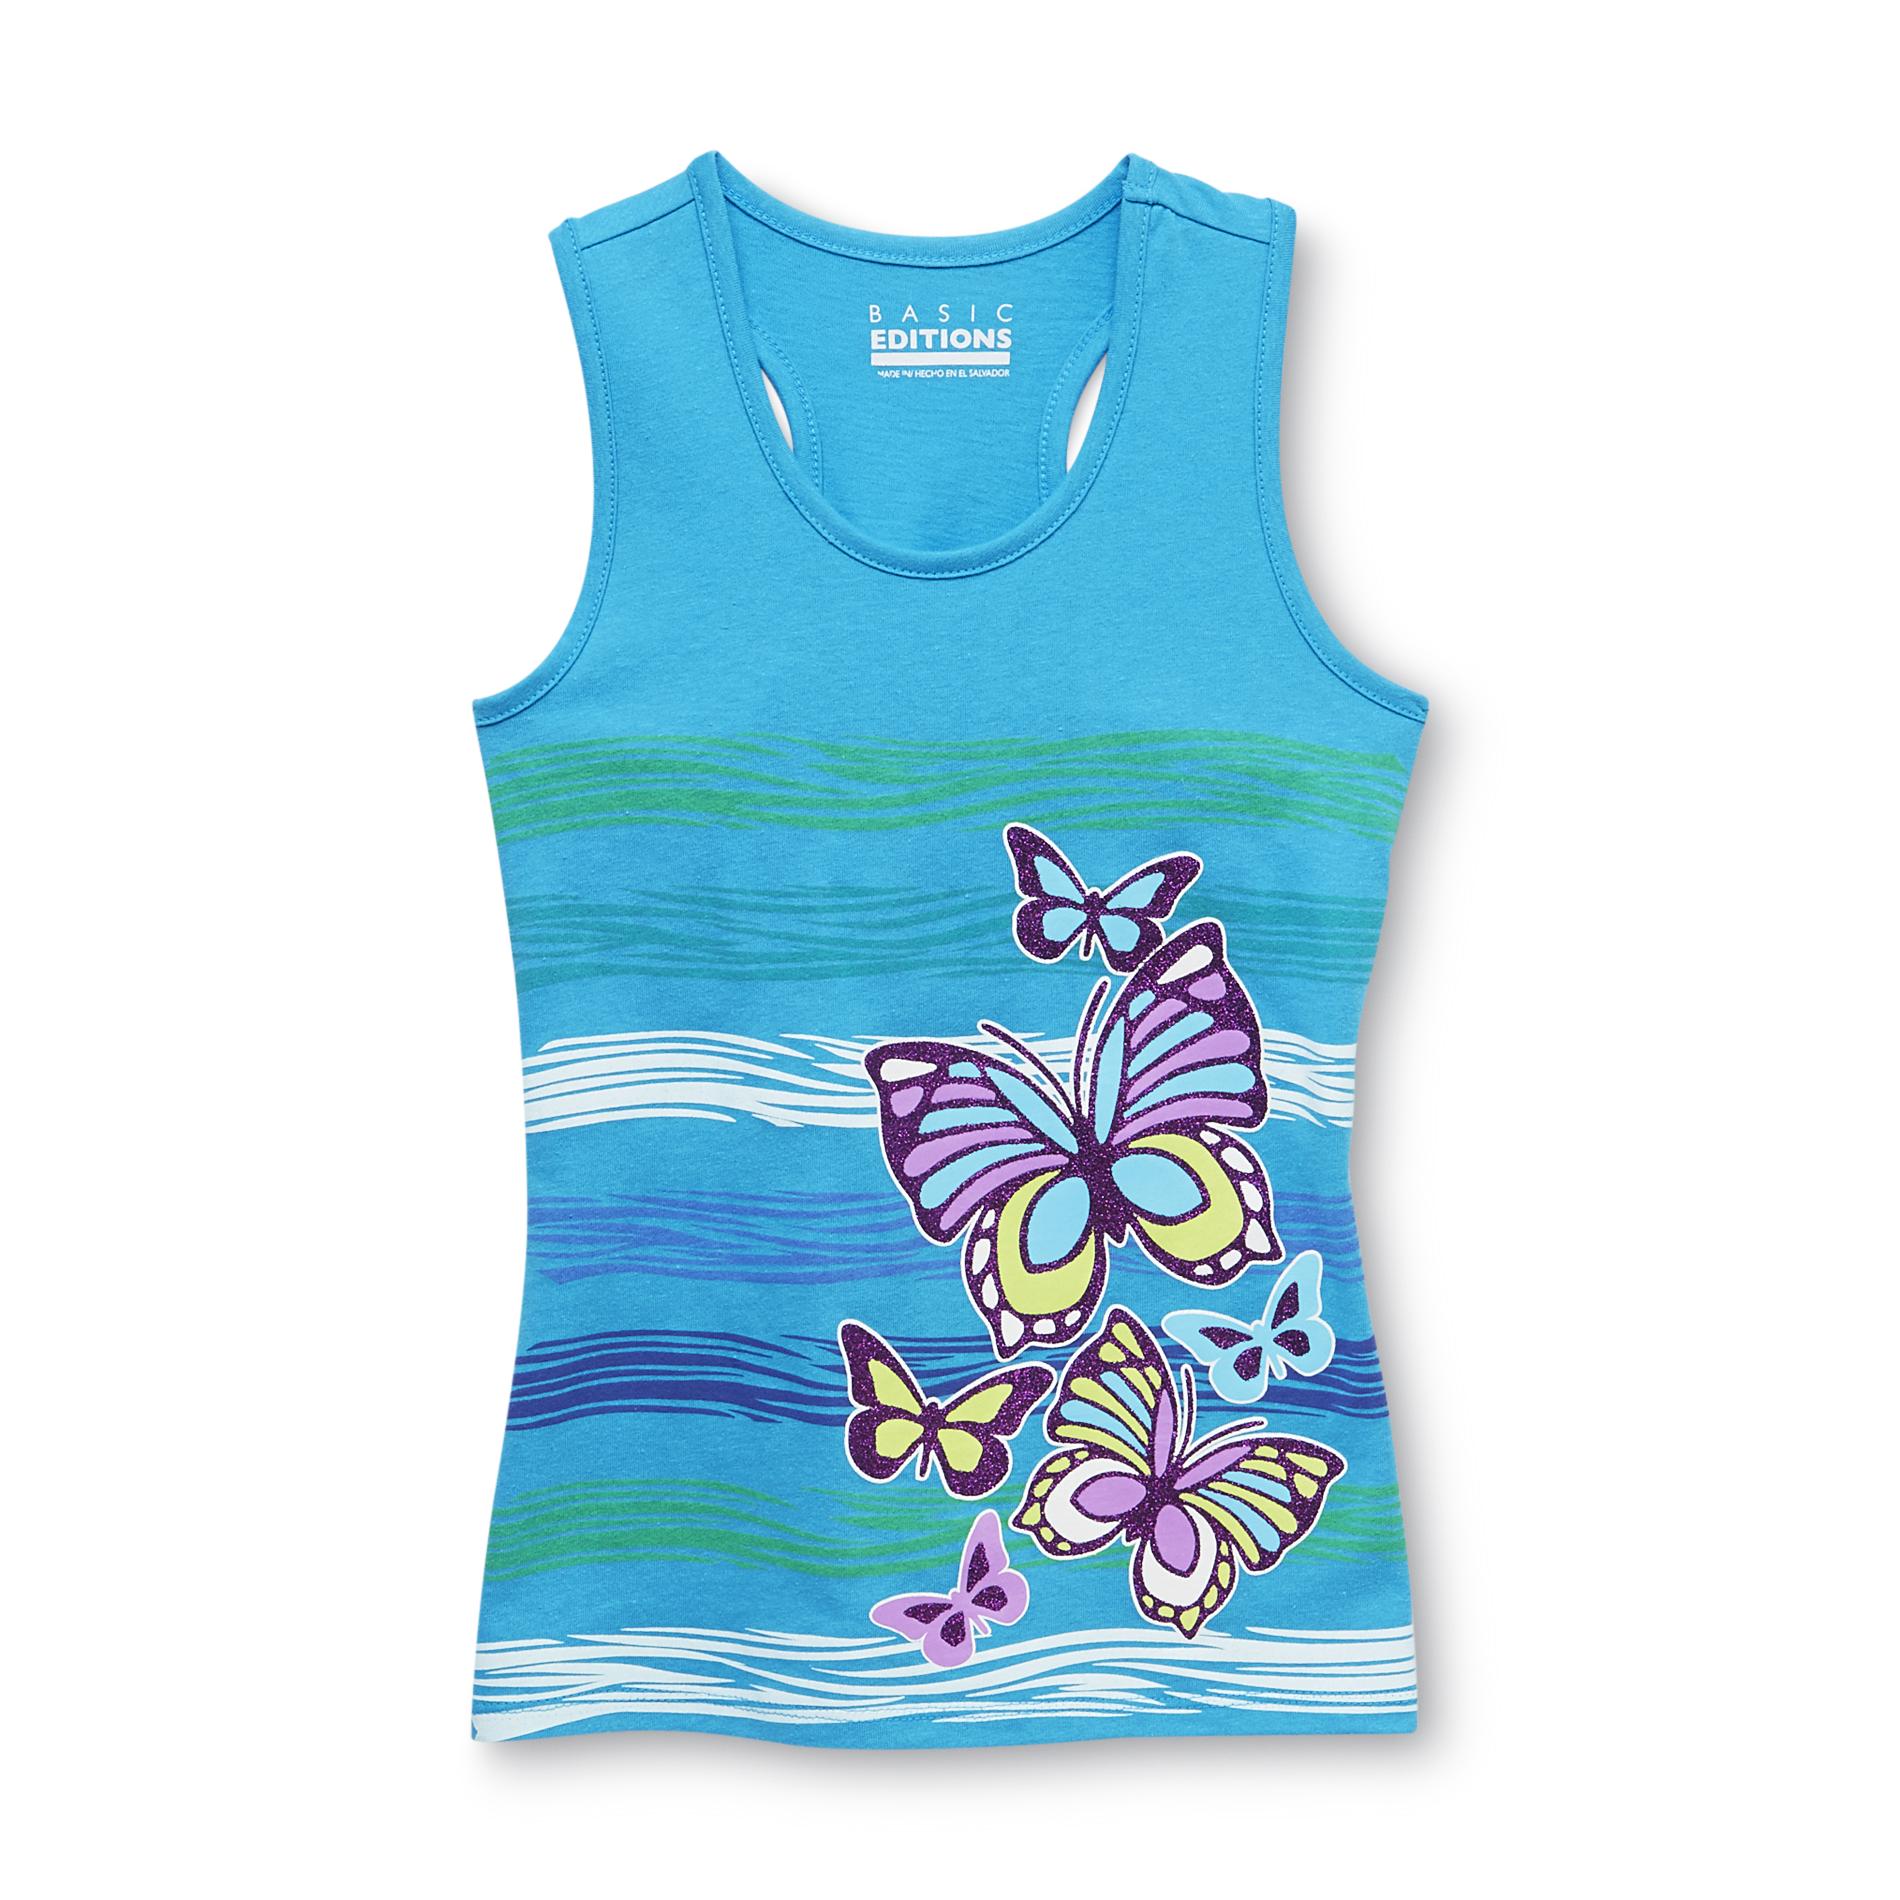 Basic Editions Girl's Racerback Tank Top - Glitter Butterfly